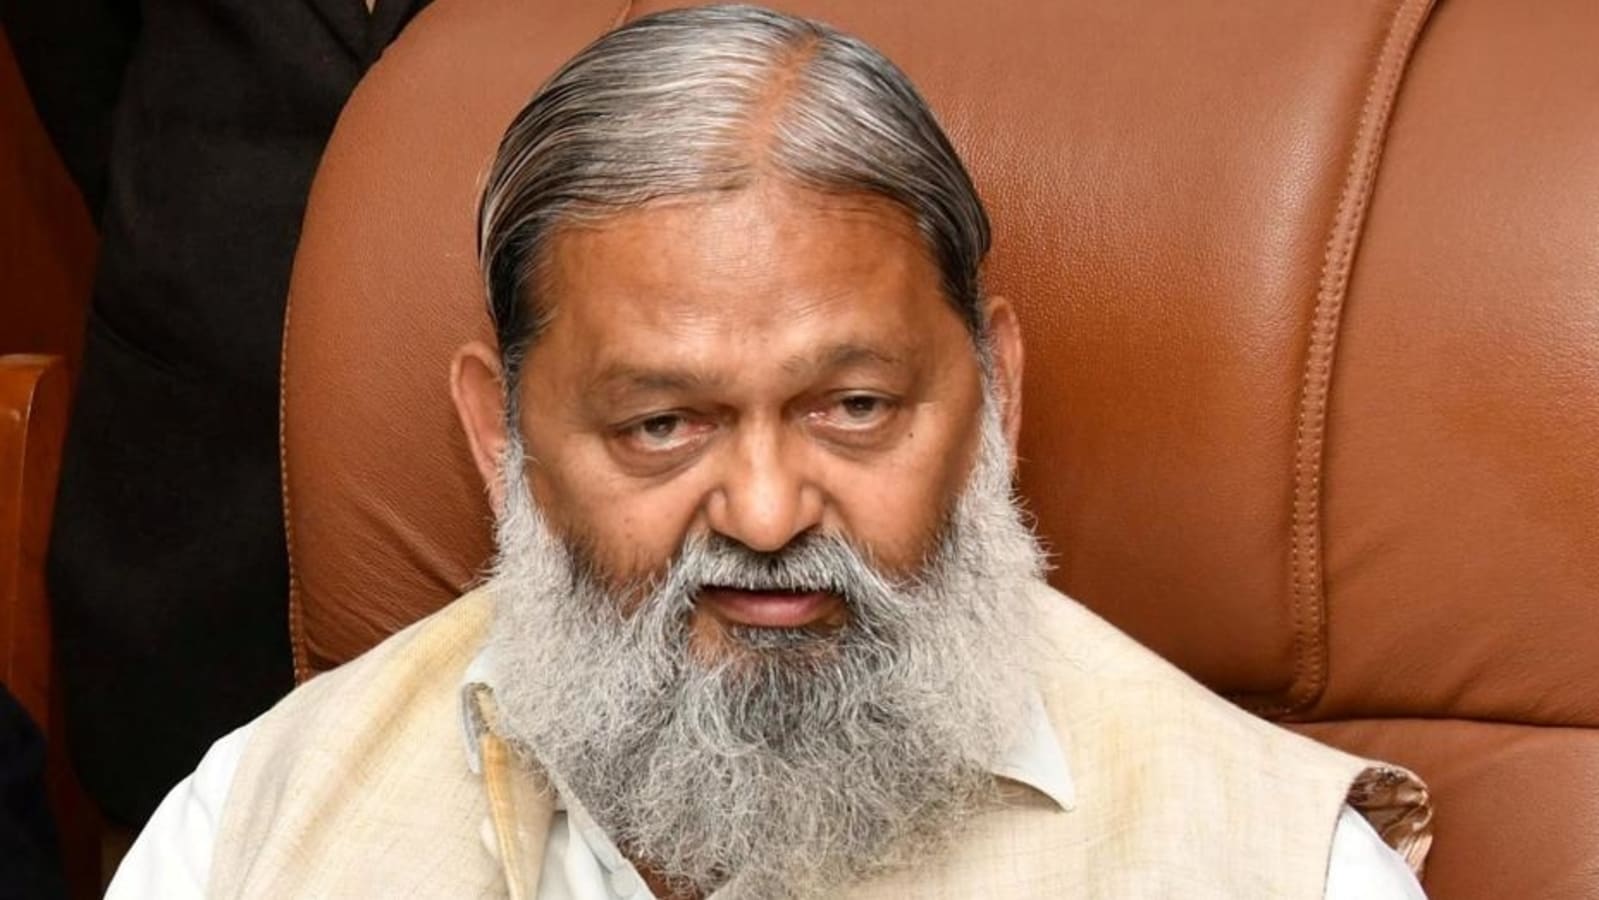 Amid rising coronavirus cases, Haryana Home Minister Anil Vij Thursday announced the new shop timings which will come in force from Friday.